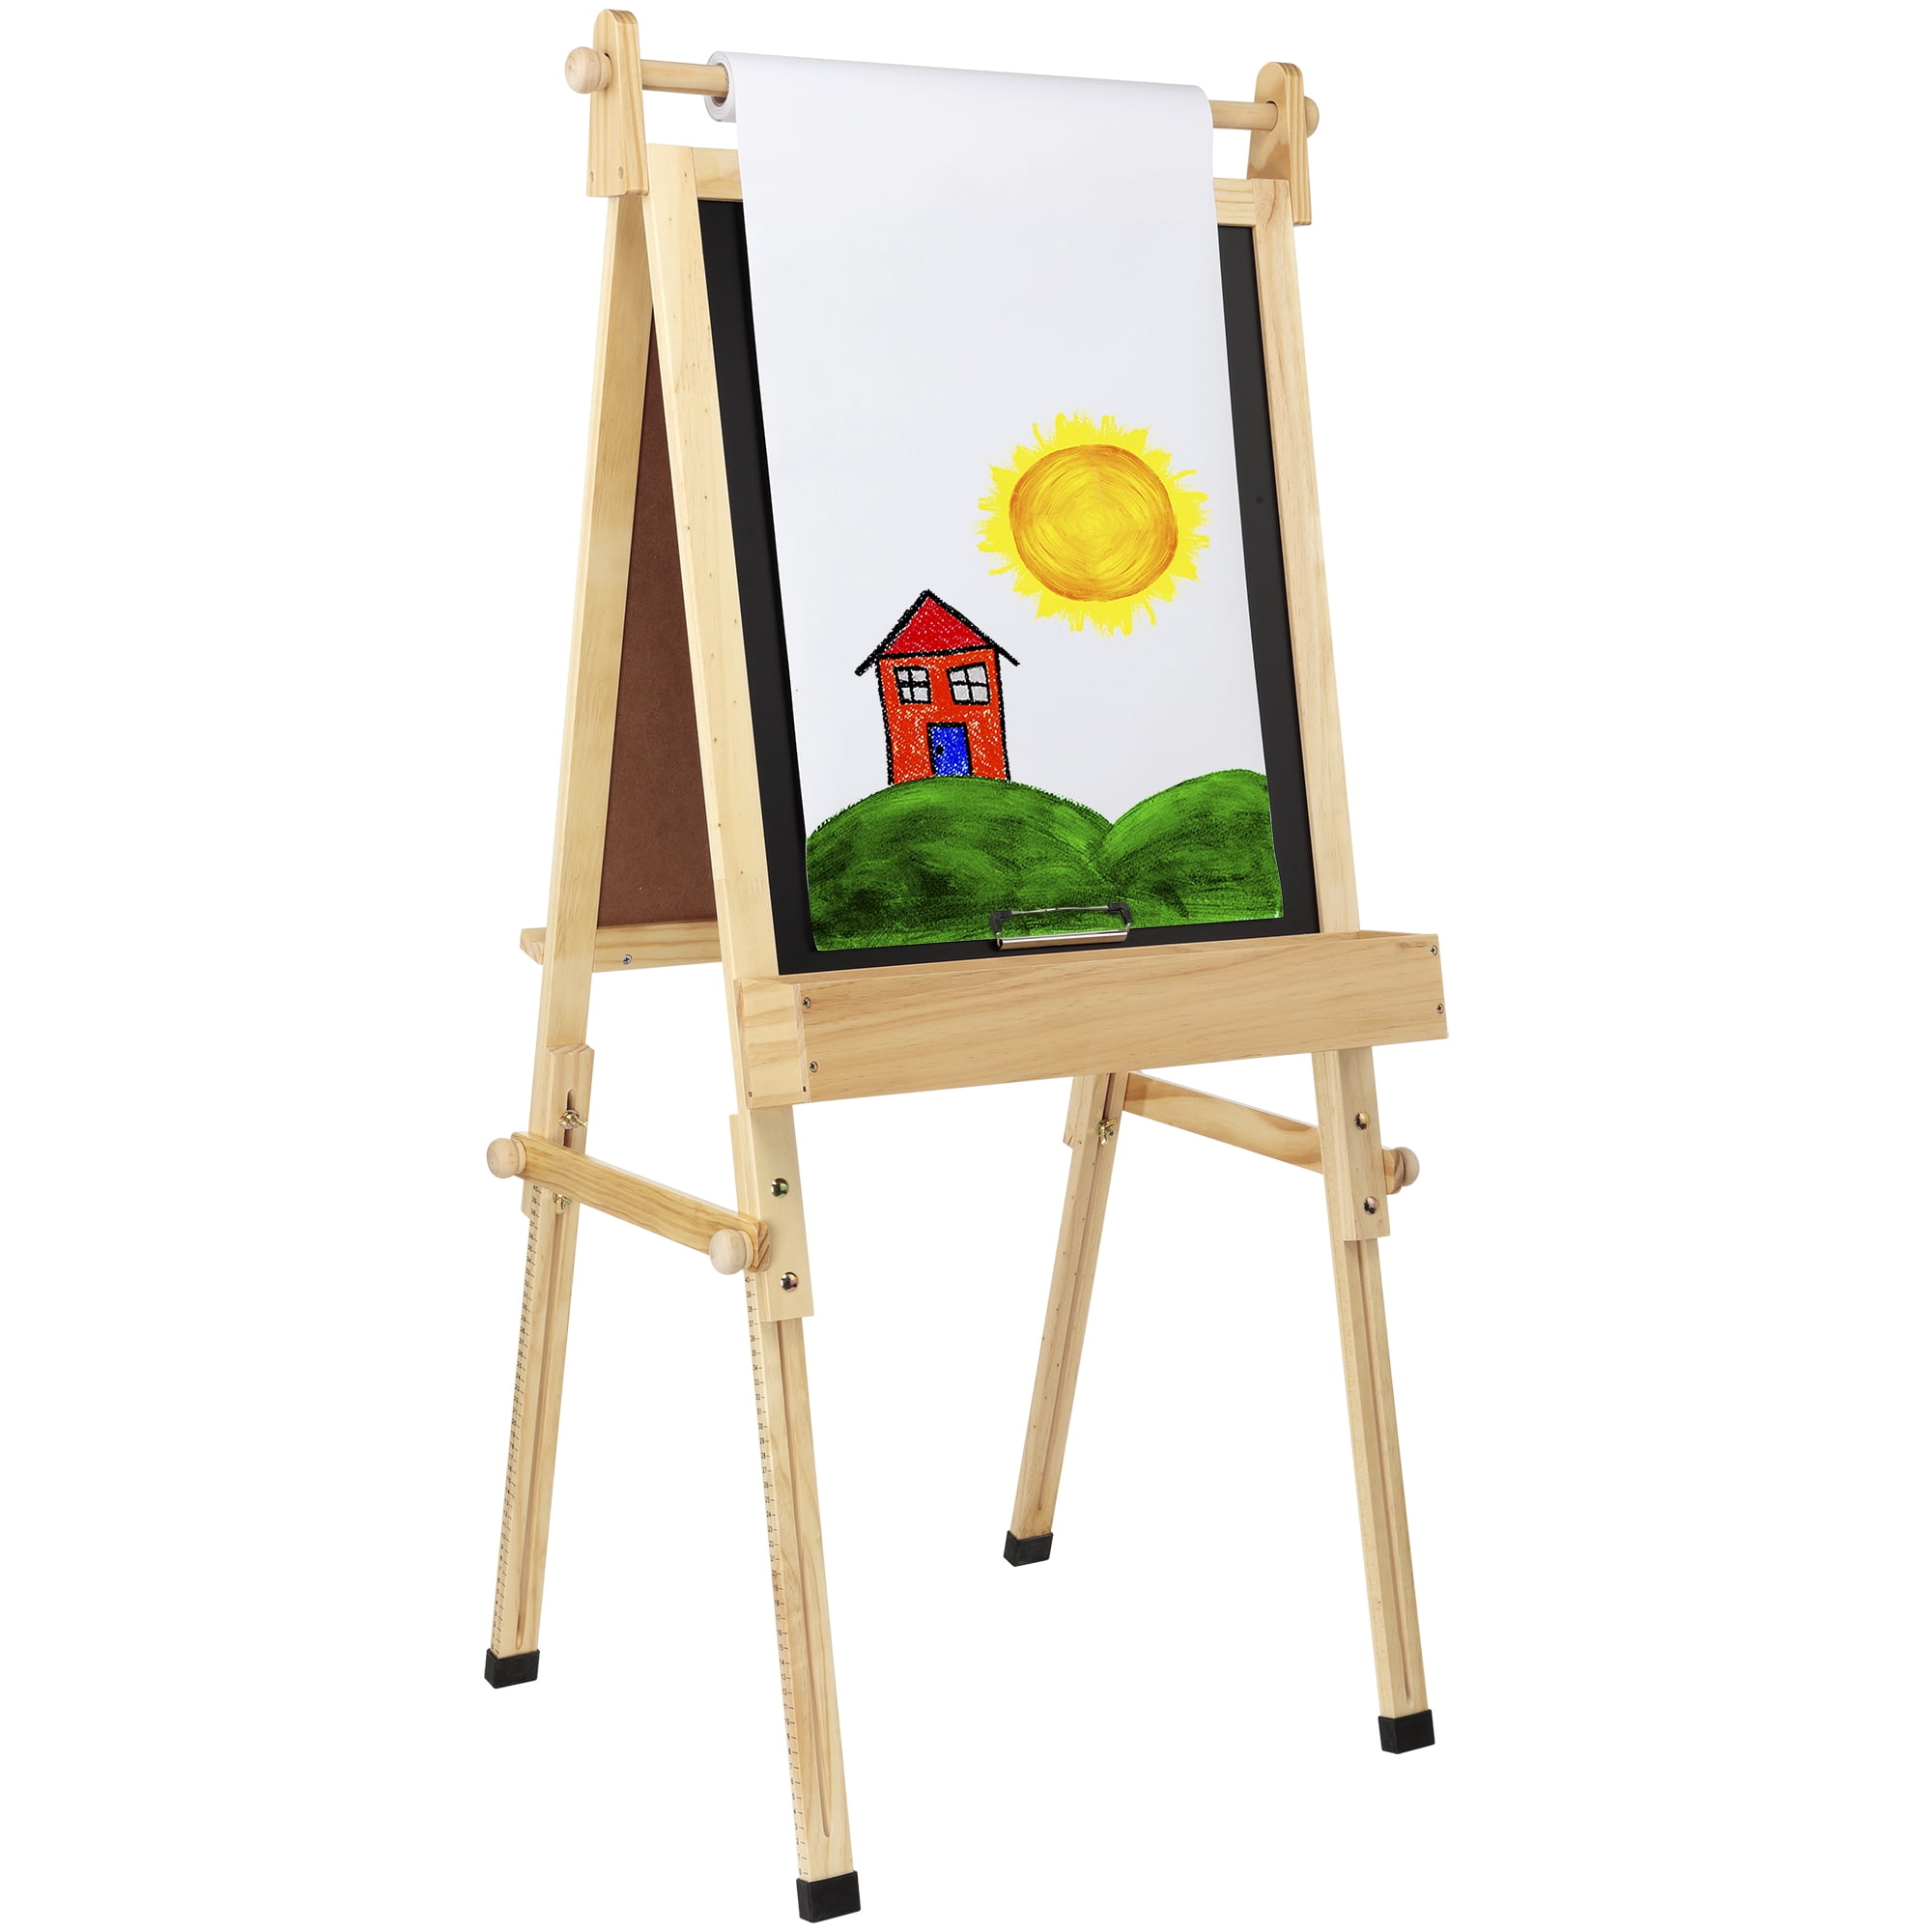 Best Easel For Painting: Top Brands Compared & Reviewed [2020]